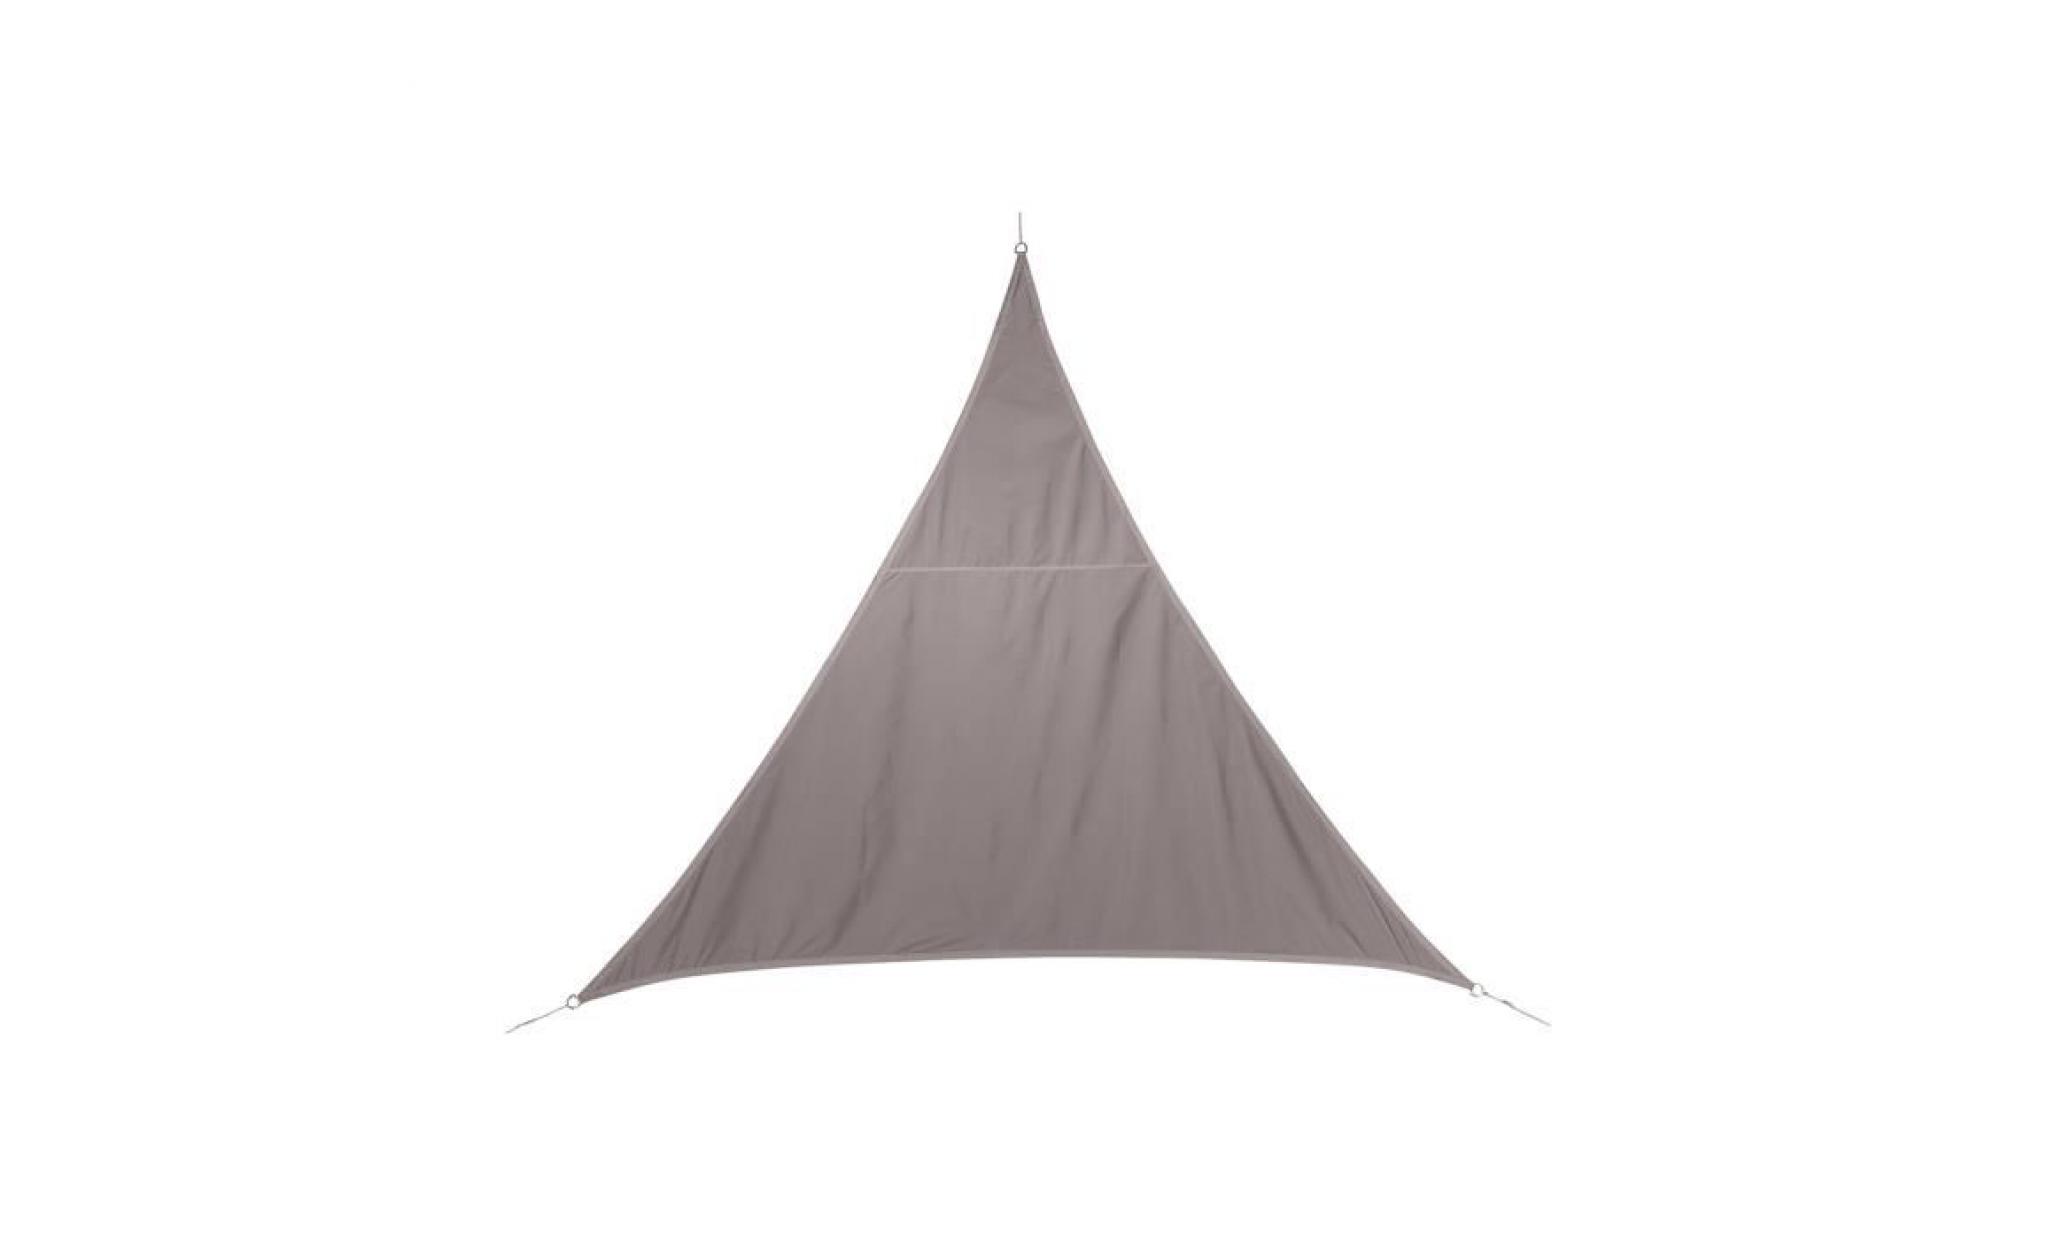 voile d'ombrage en polyester taupe, 300 x 300 x 300 cm